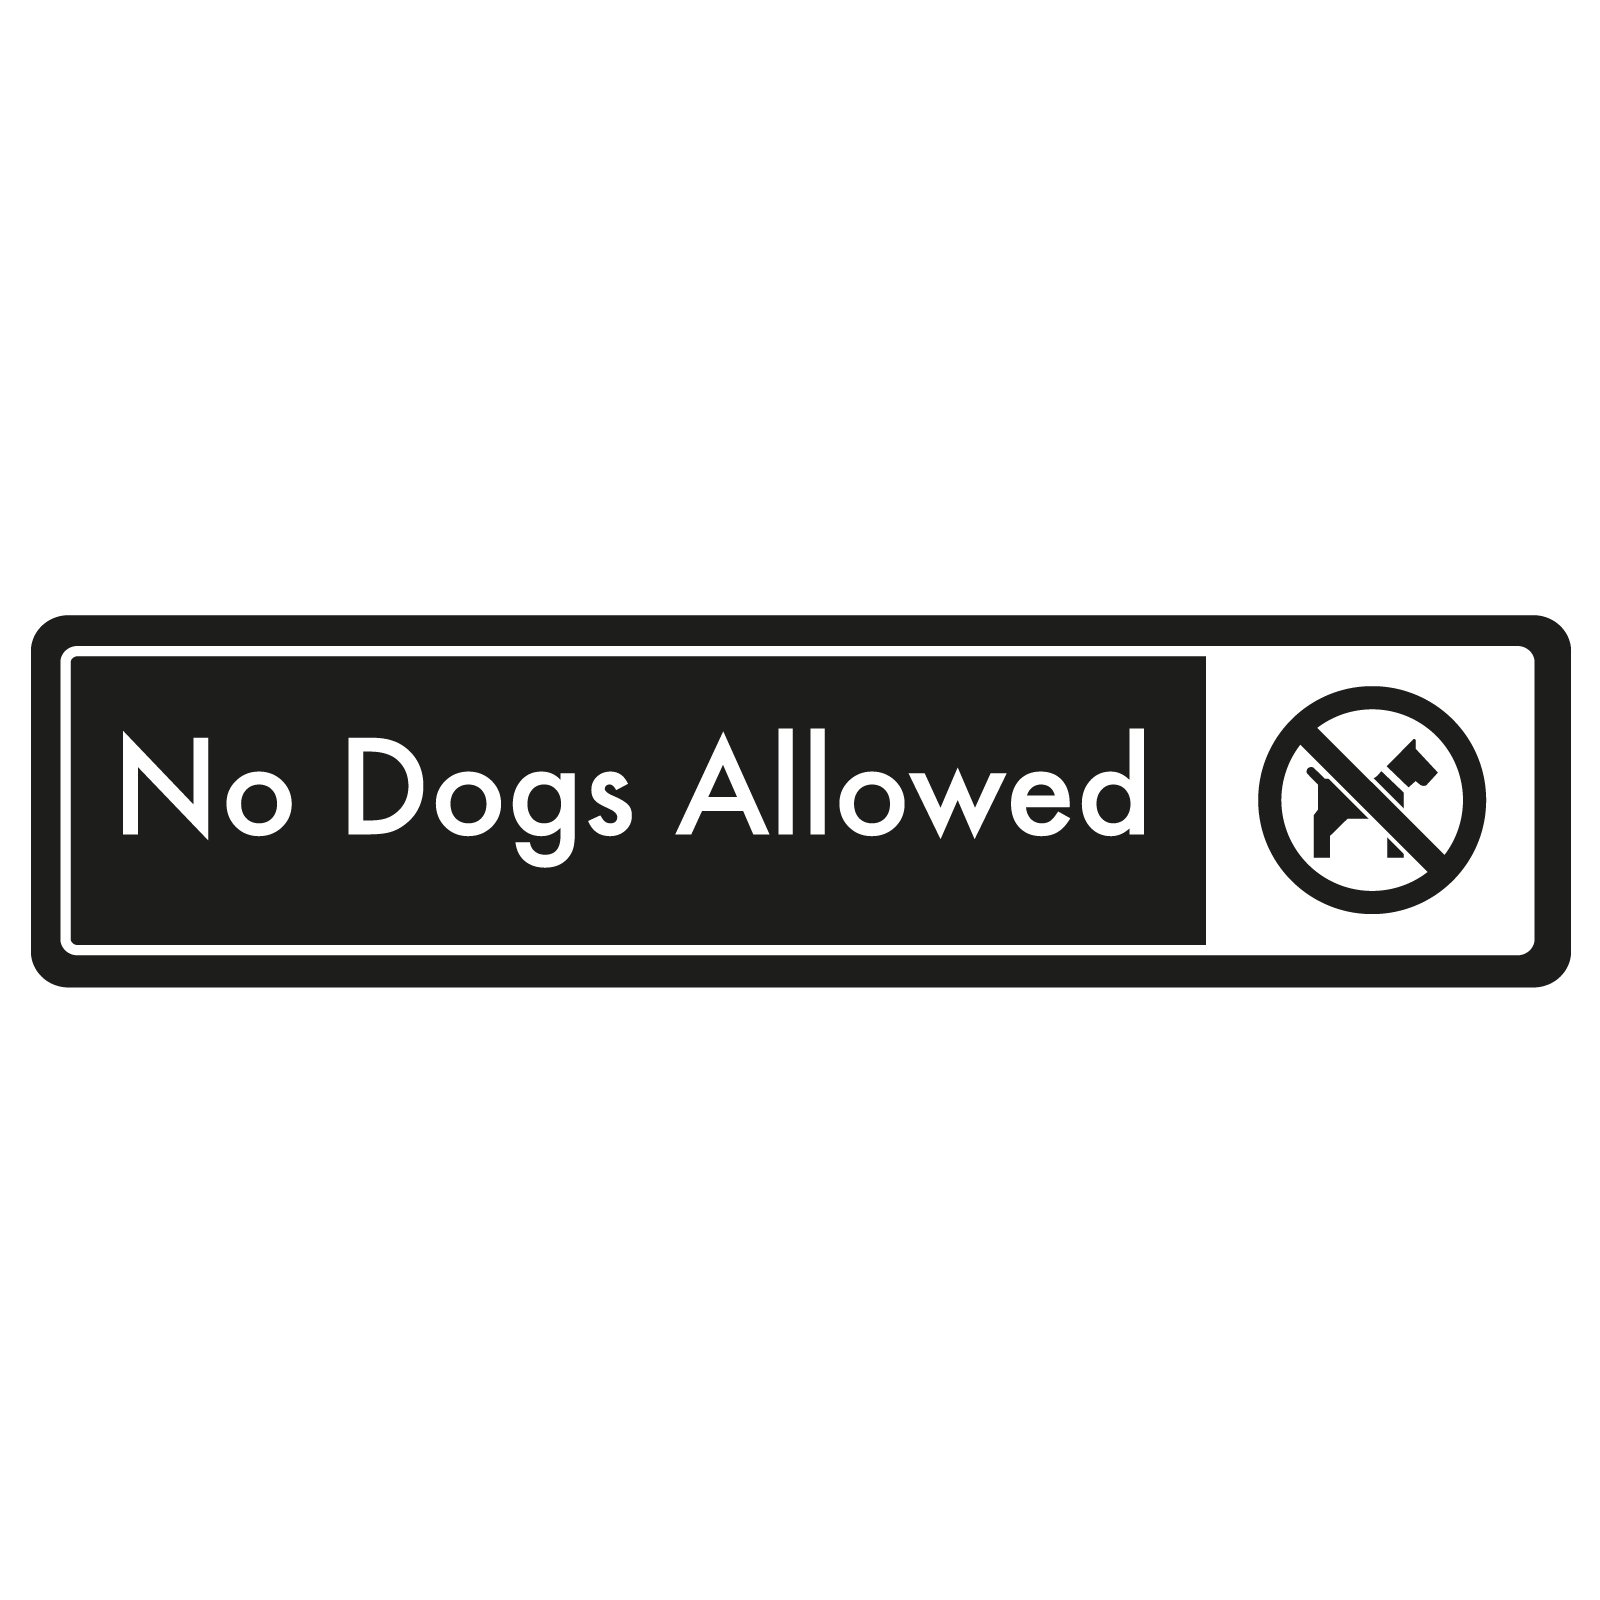 No Dogs Allowed Door Sign - White on Black